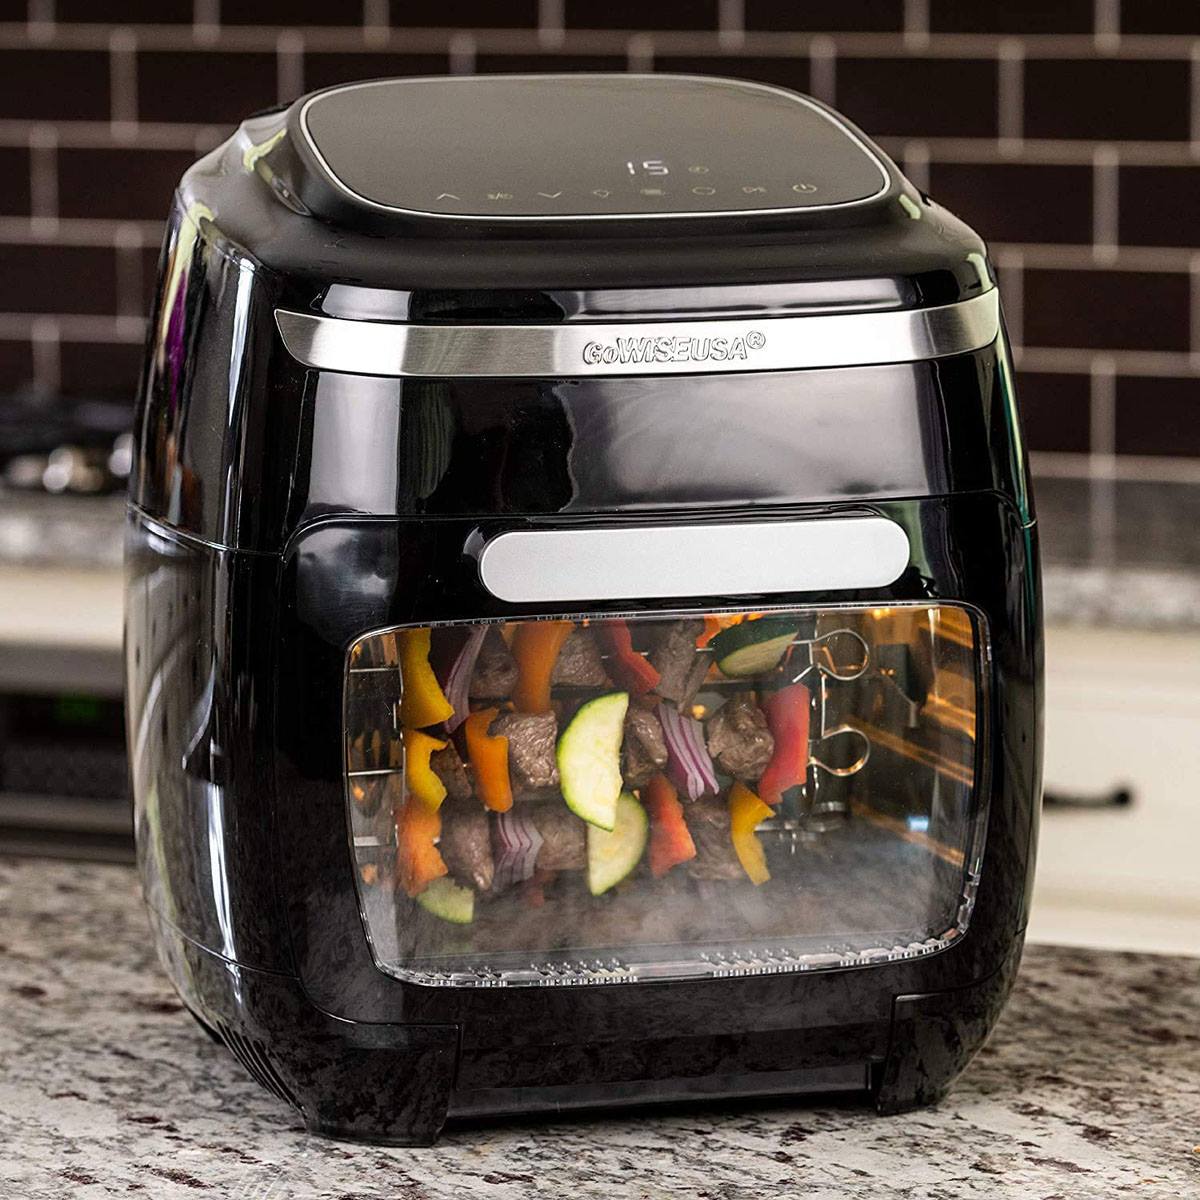 GoWISE USA  11.6qt. Vibe Air Fryer Oven